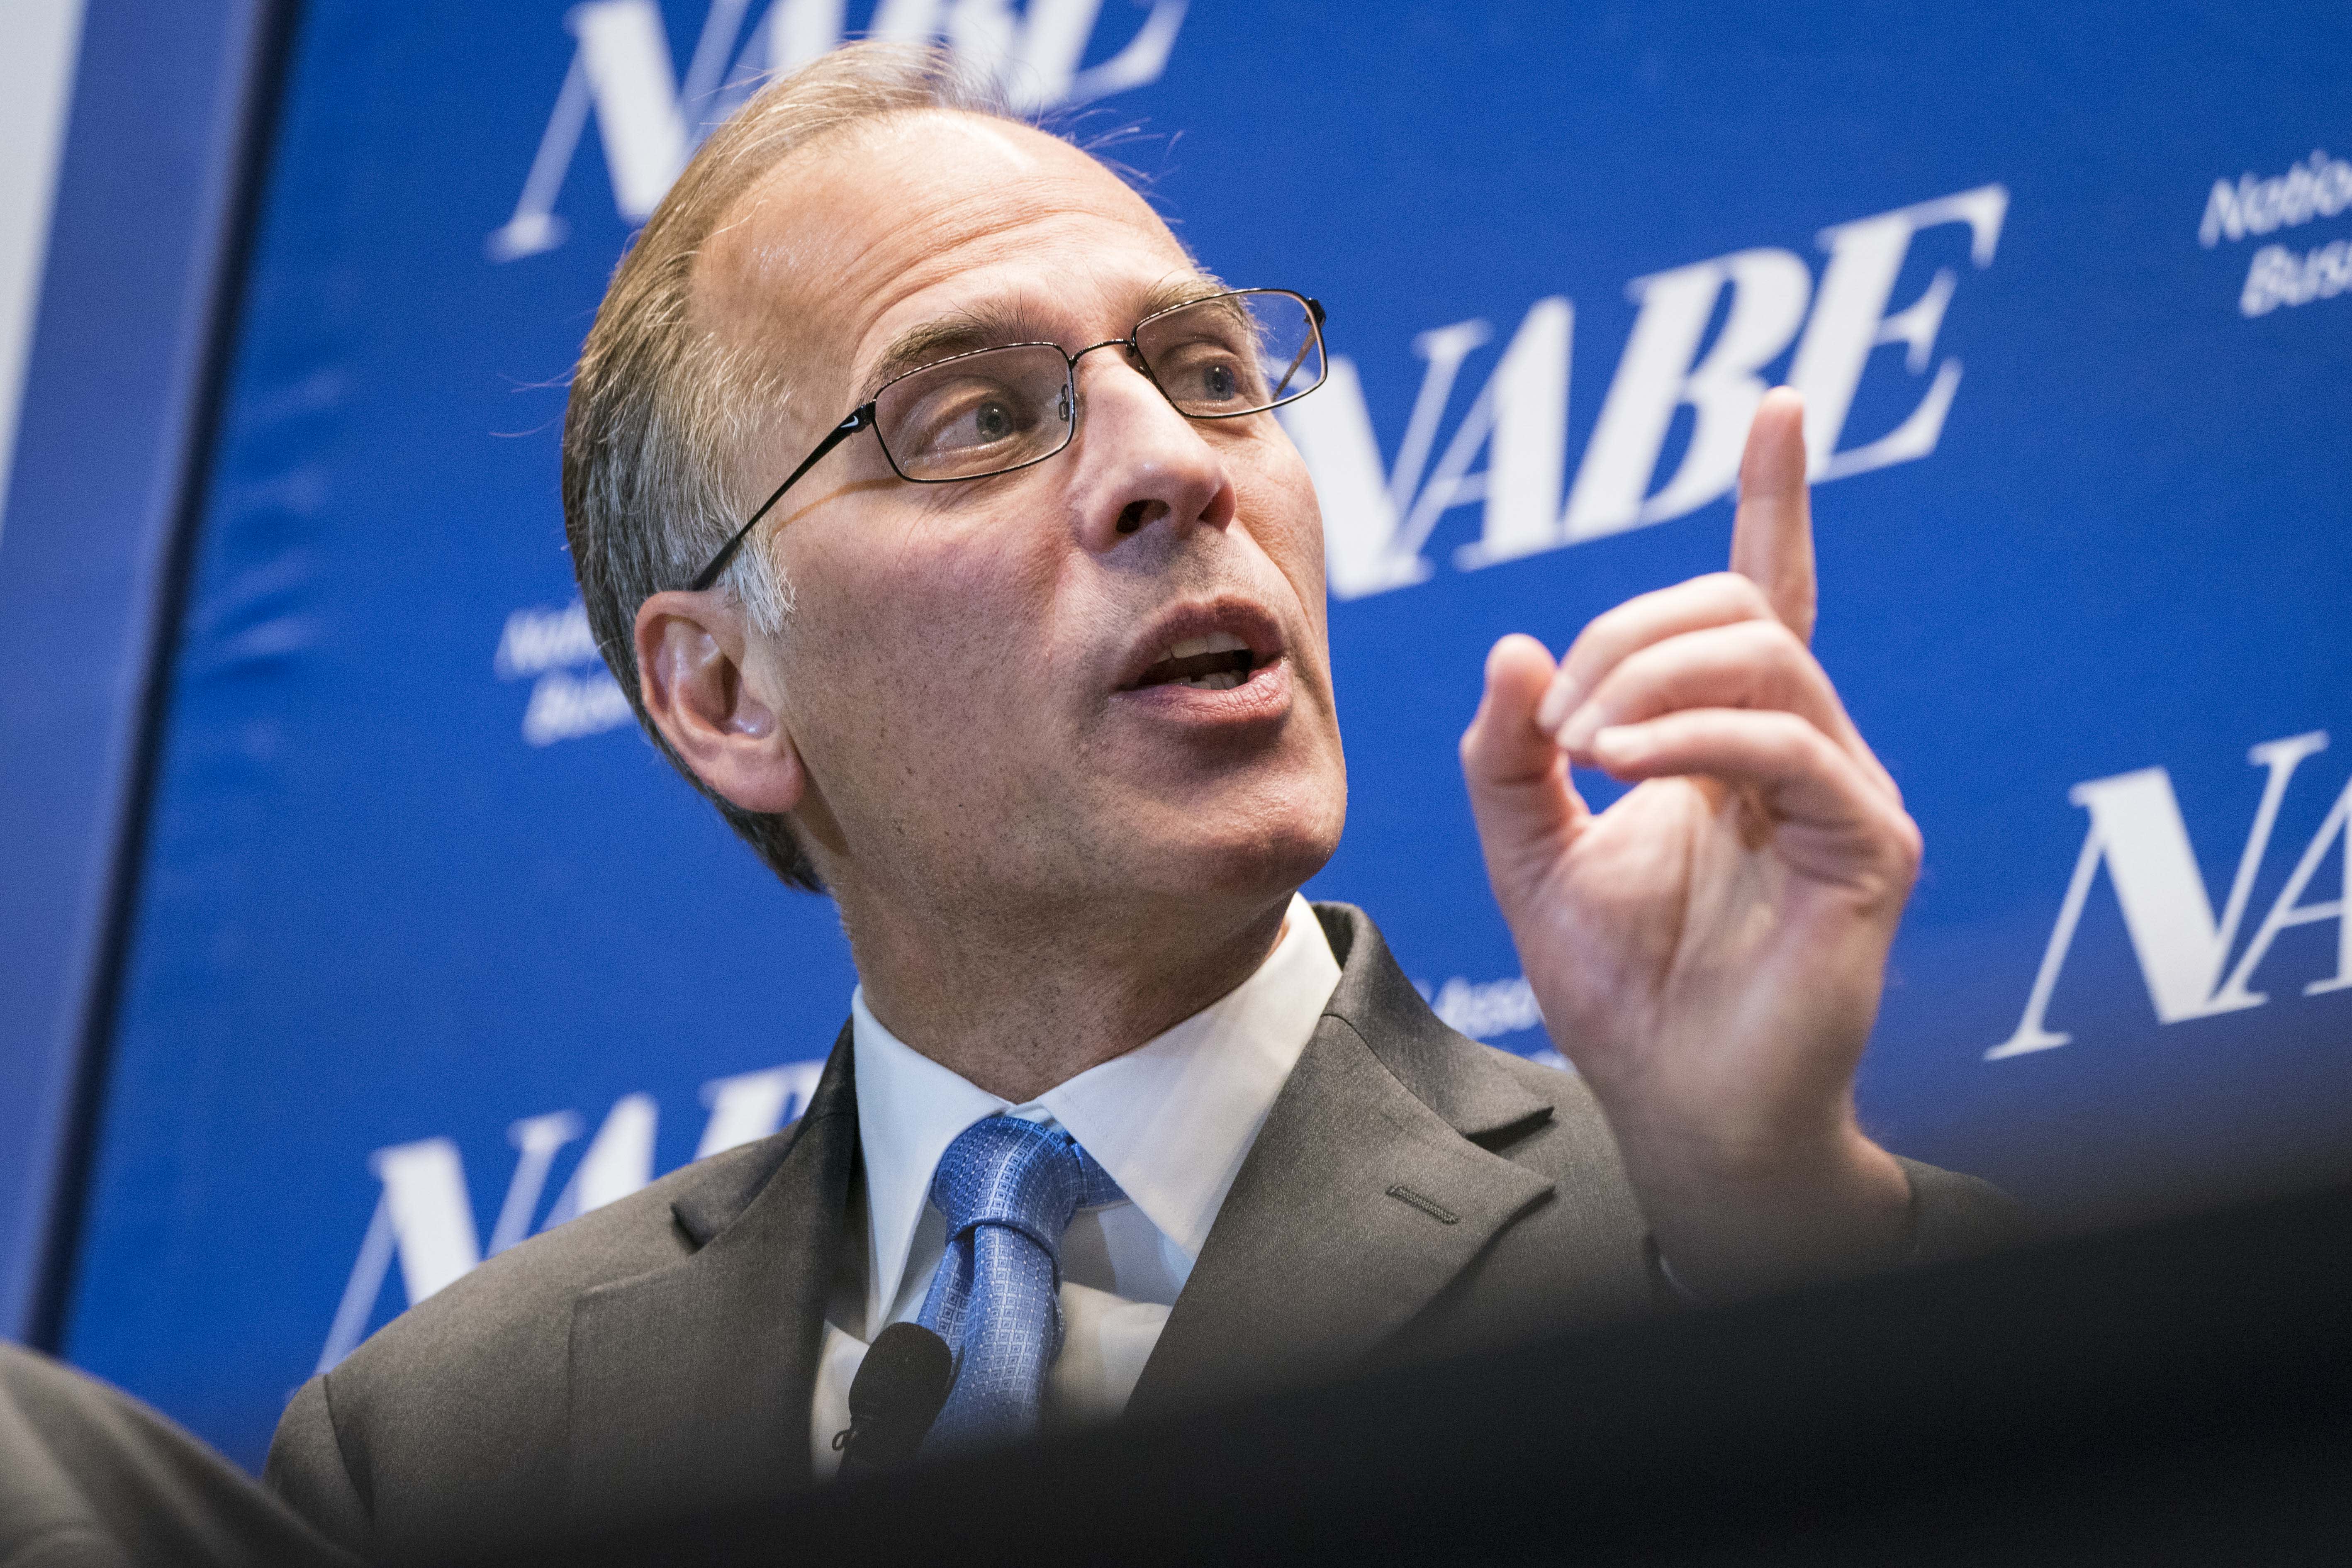 Beware of inflation ‘headwinds’: It could take a year to break even after a 10% to 20% market correction, economist Mark Zandi warns